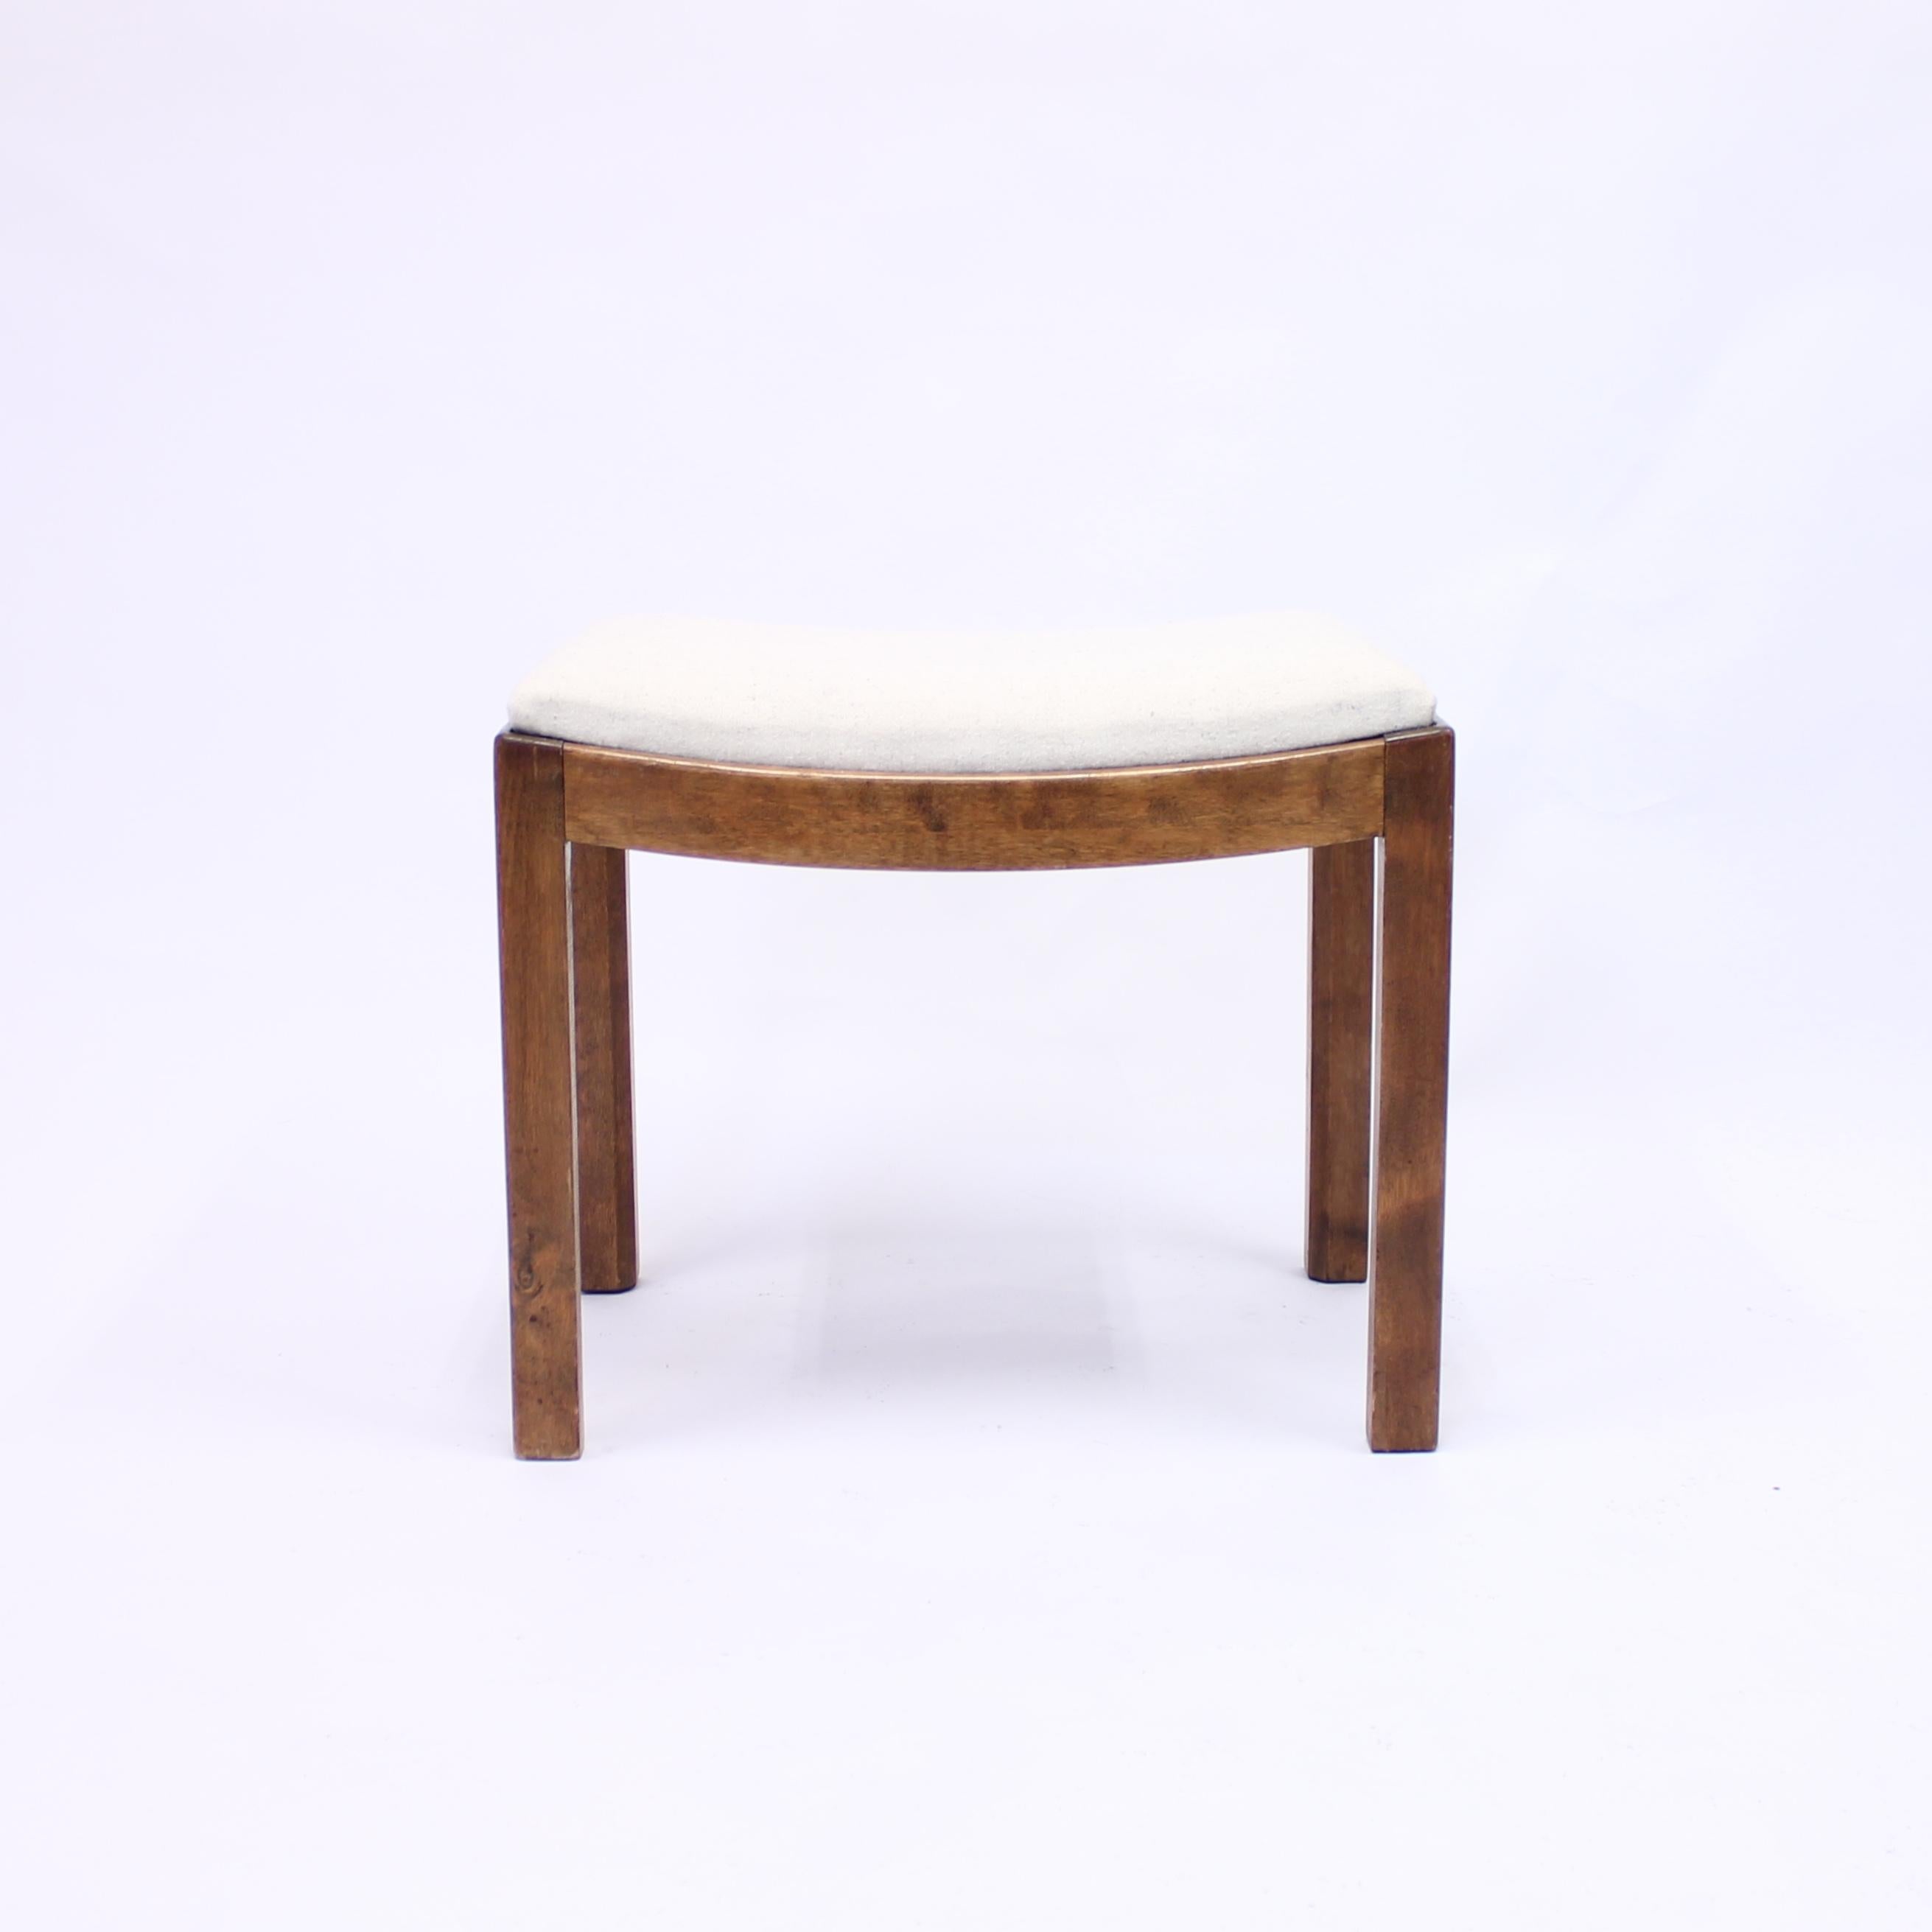 Scandinavian birch Art Deco stool from the 1930s with new off-white felt fabric. The whole seat has been redone with new webbing and padding under the new fabric. Very good vintage condition with light ware consistent with age and use.